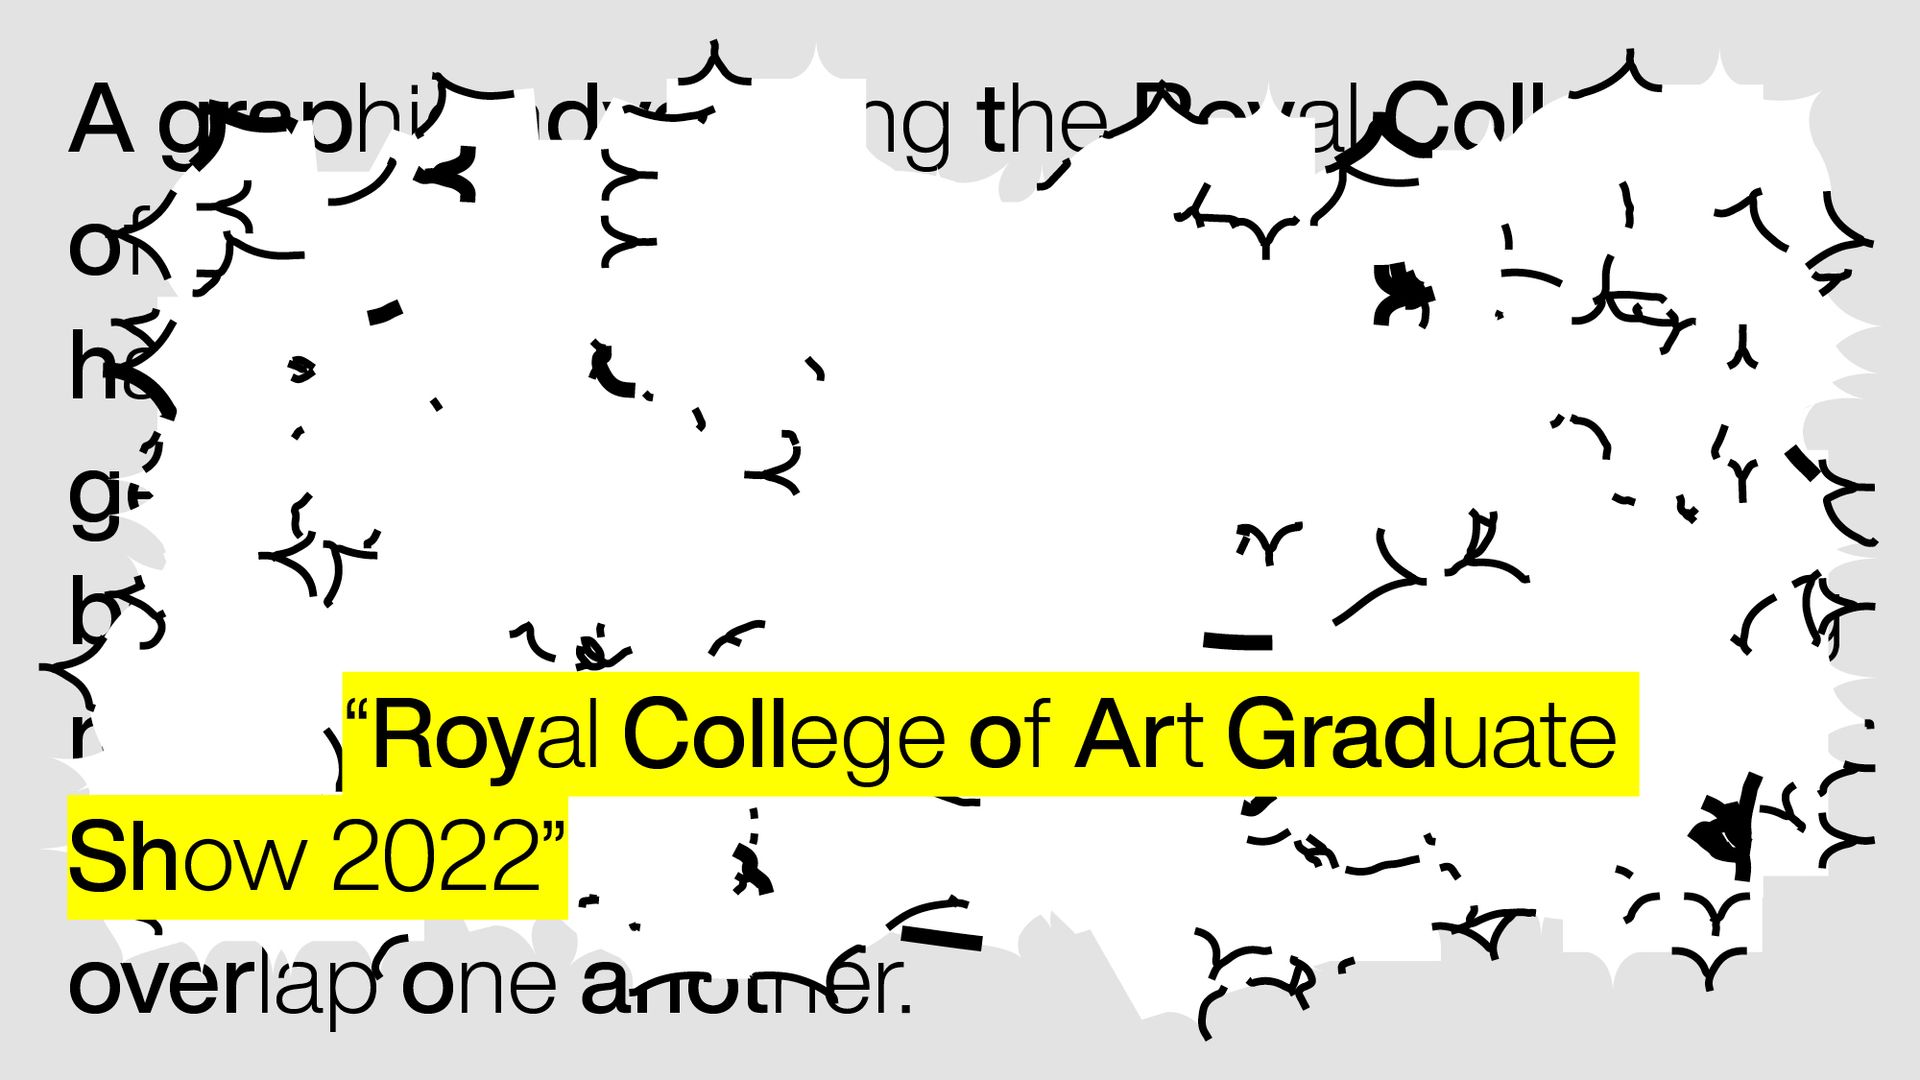 Black text on a light grey background is obscured by spiky cloud-like white graphics outlined in black. In black text highlighted in yellow text reads: “Royal College of Art Graduate Show 2022”.